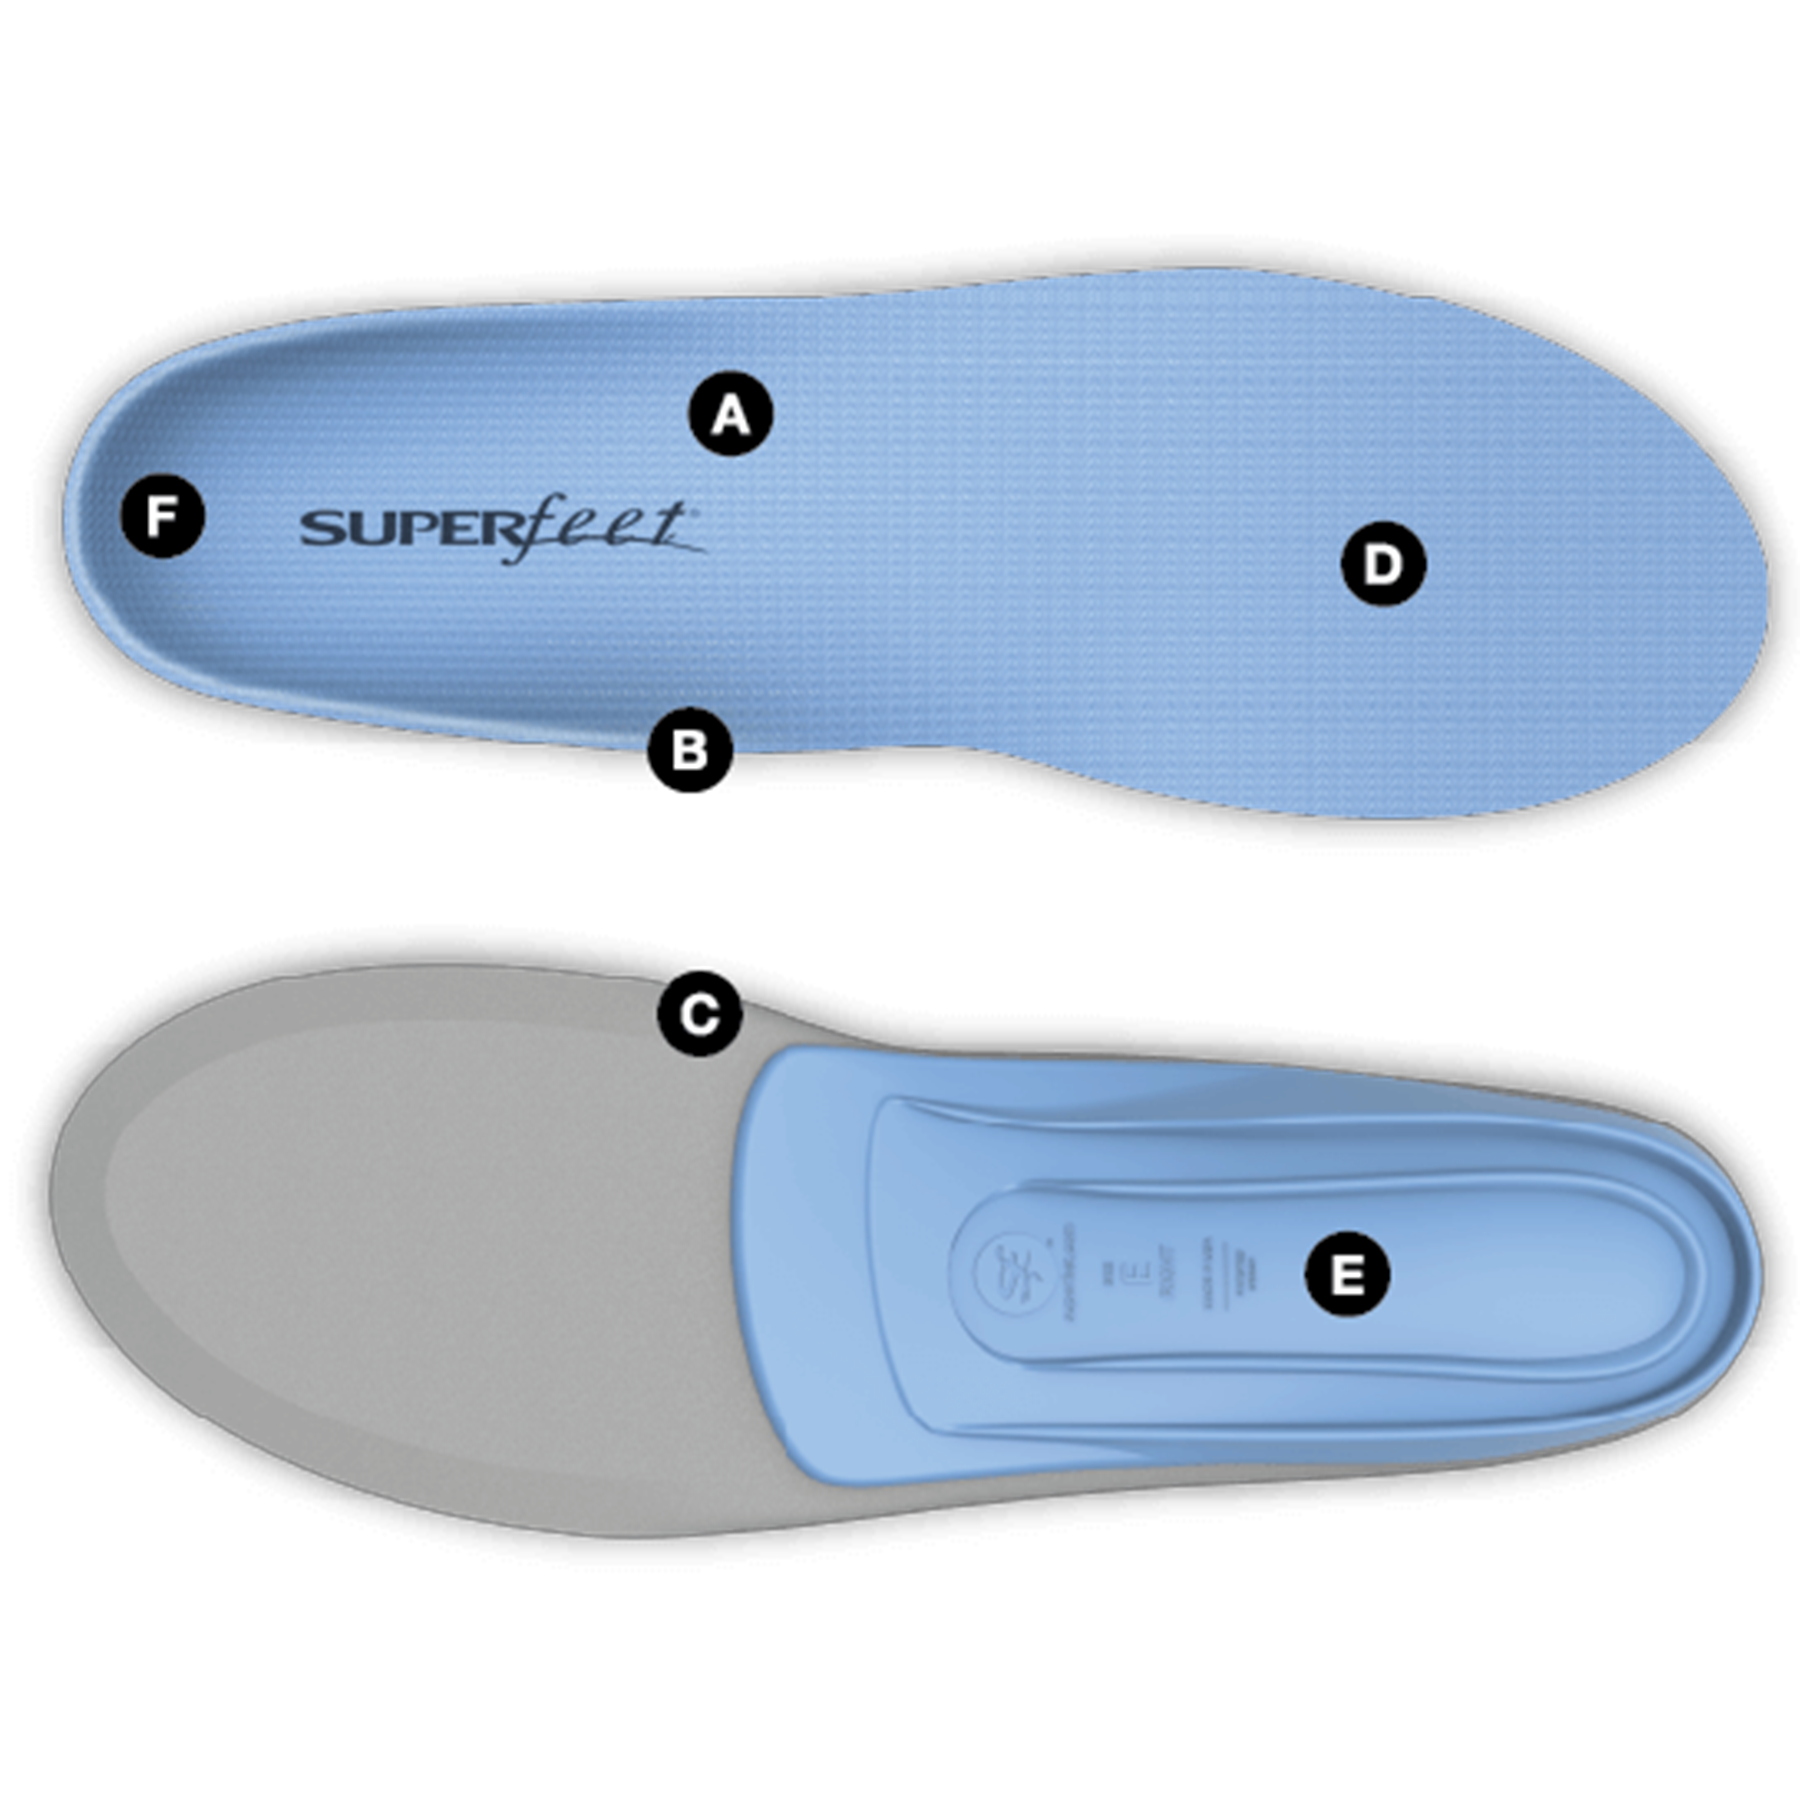 An annotated view of the blue superfeets with the features called out with letters